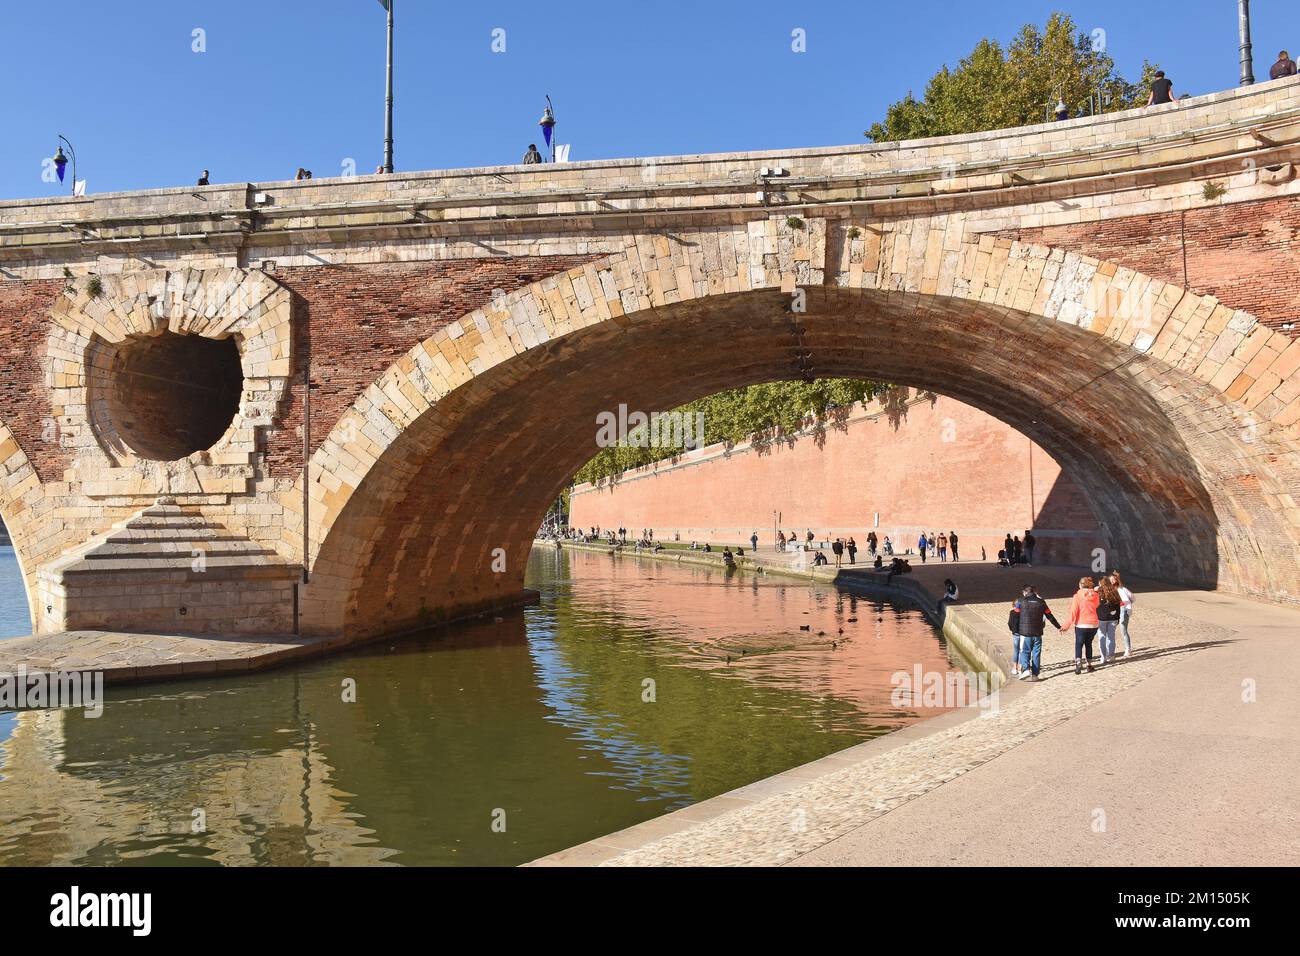 The seven-arched Pont Neuf spanning the river Garonne, Toulouse, France, built 1542-1632; masonry with brick infill panels, a Renaissance masterpiece Stock Photo